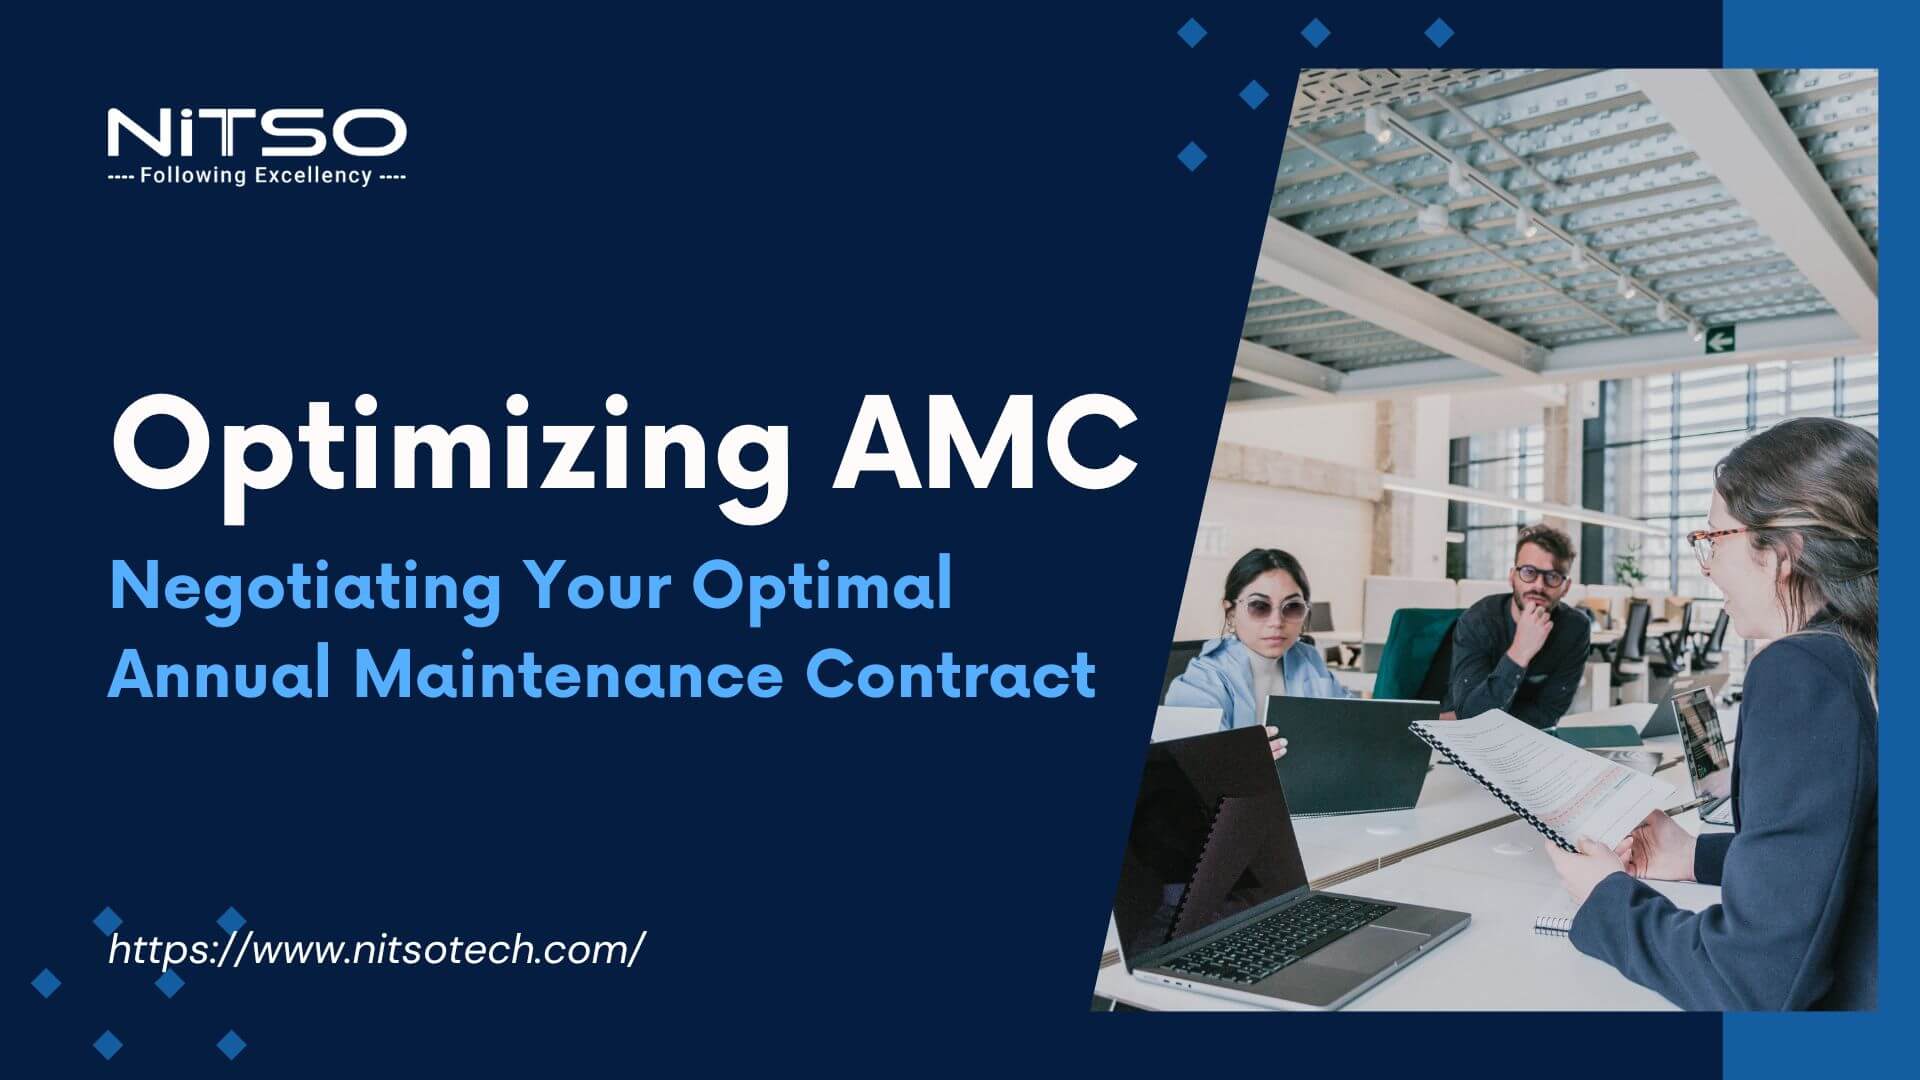 Master the Art of Optimizing AMC (Annual Maintenance Contract)